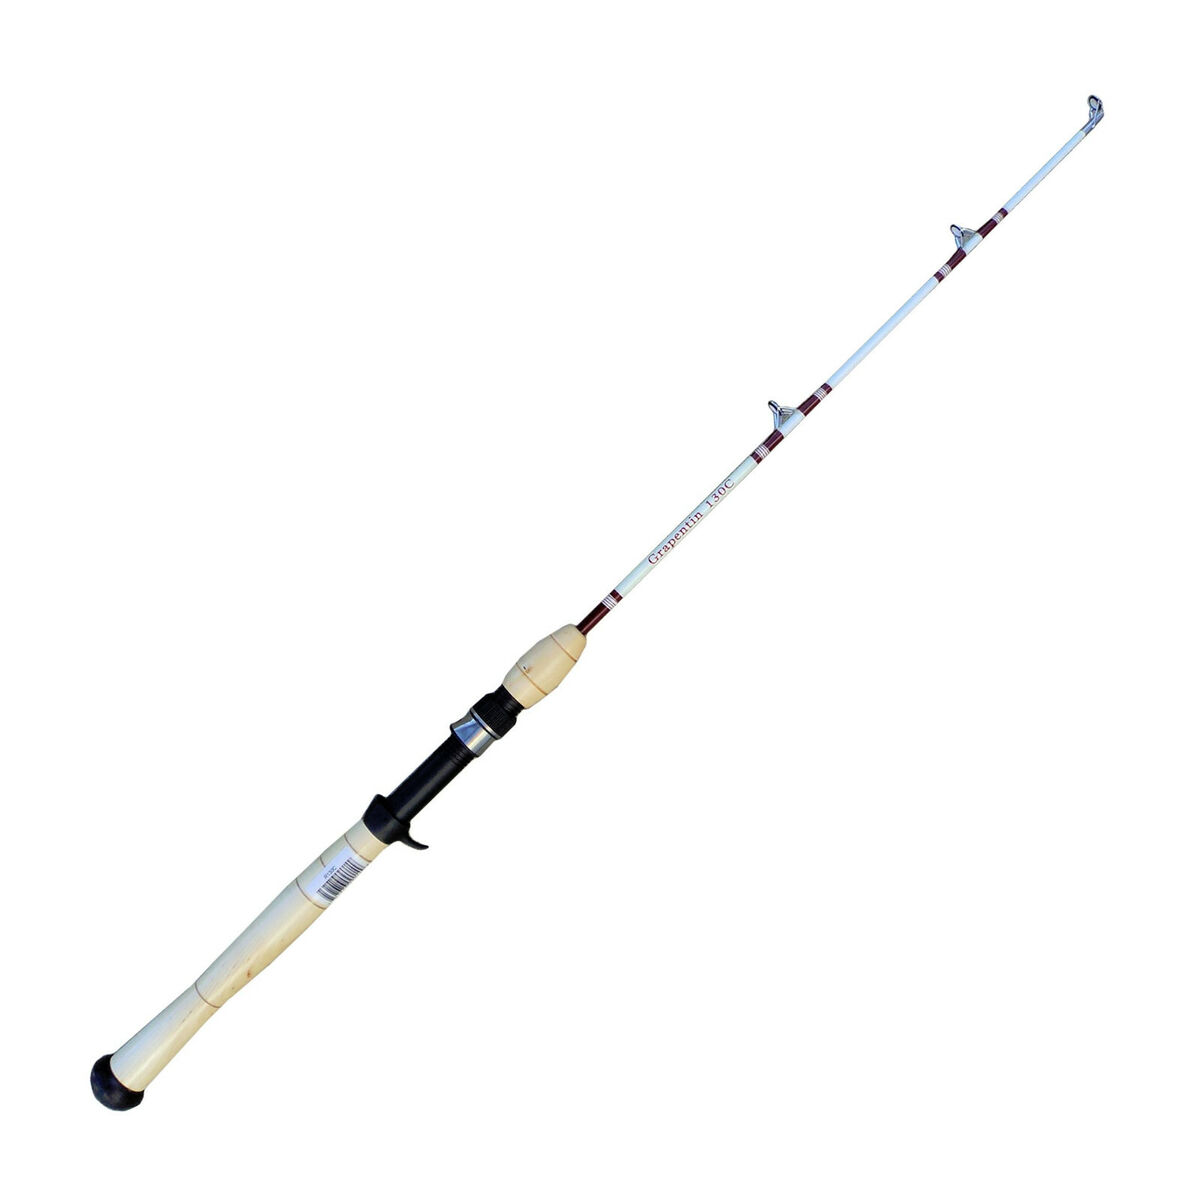 3' Whipping Fishing Rods - TWO - for Chugging, Jigging, Jerking